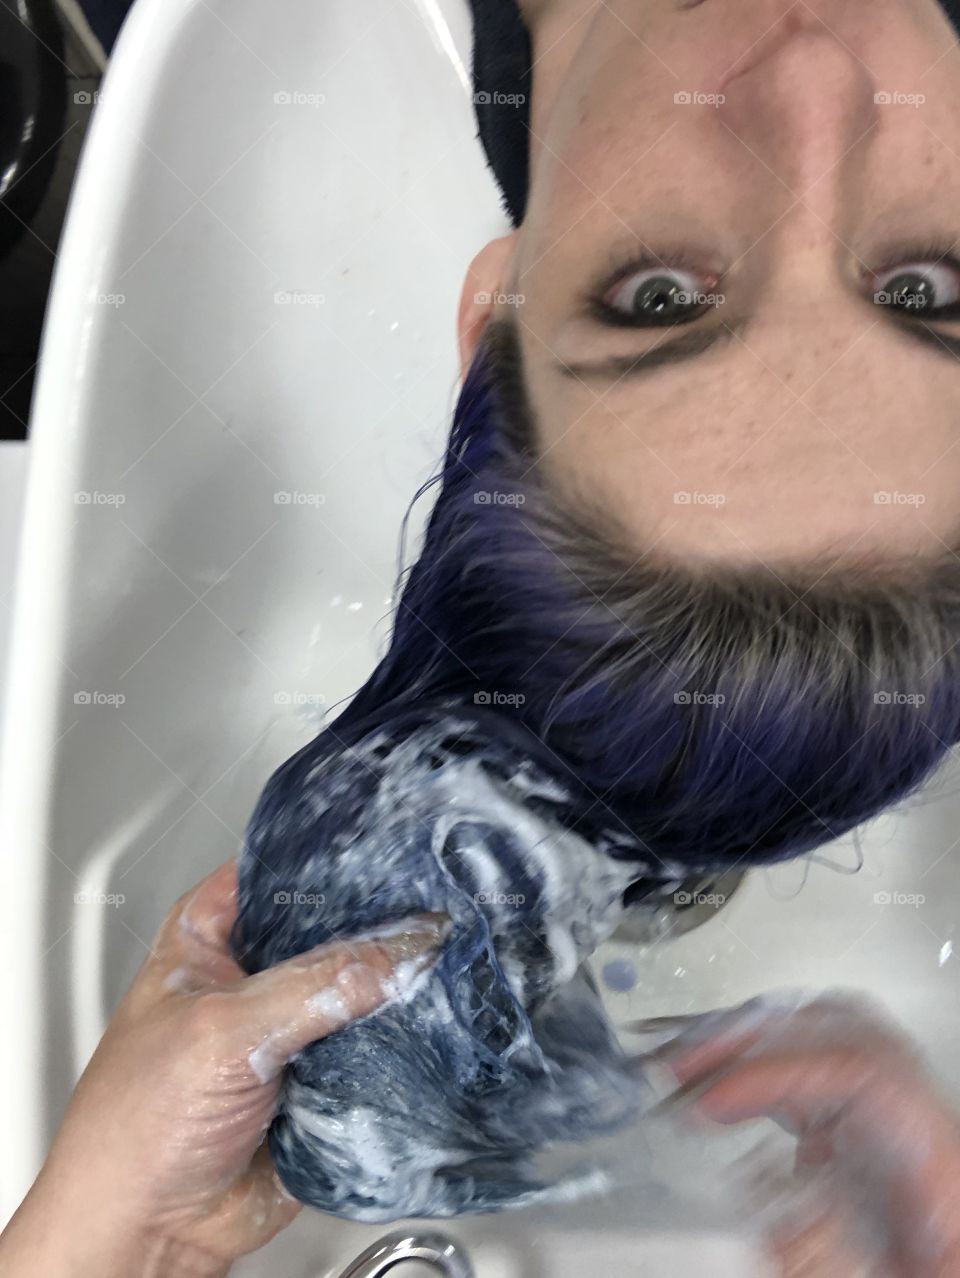 Purple hair color being washed out in sink at a hair salon